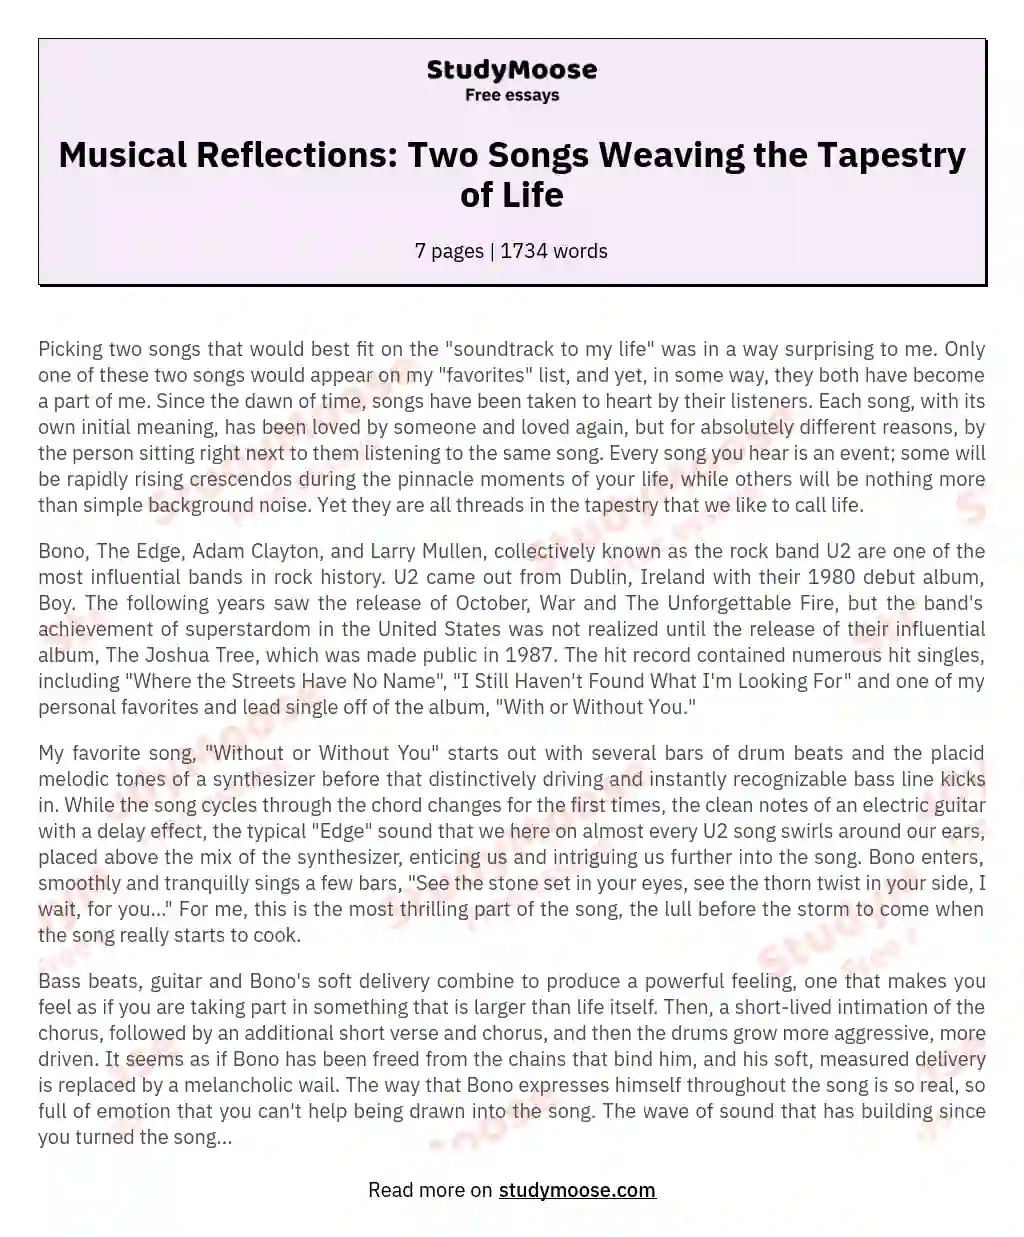 Musical Reflections: Two Songs Weaving the Tapestry of Life essay